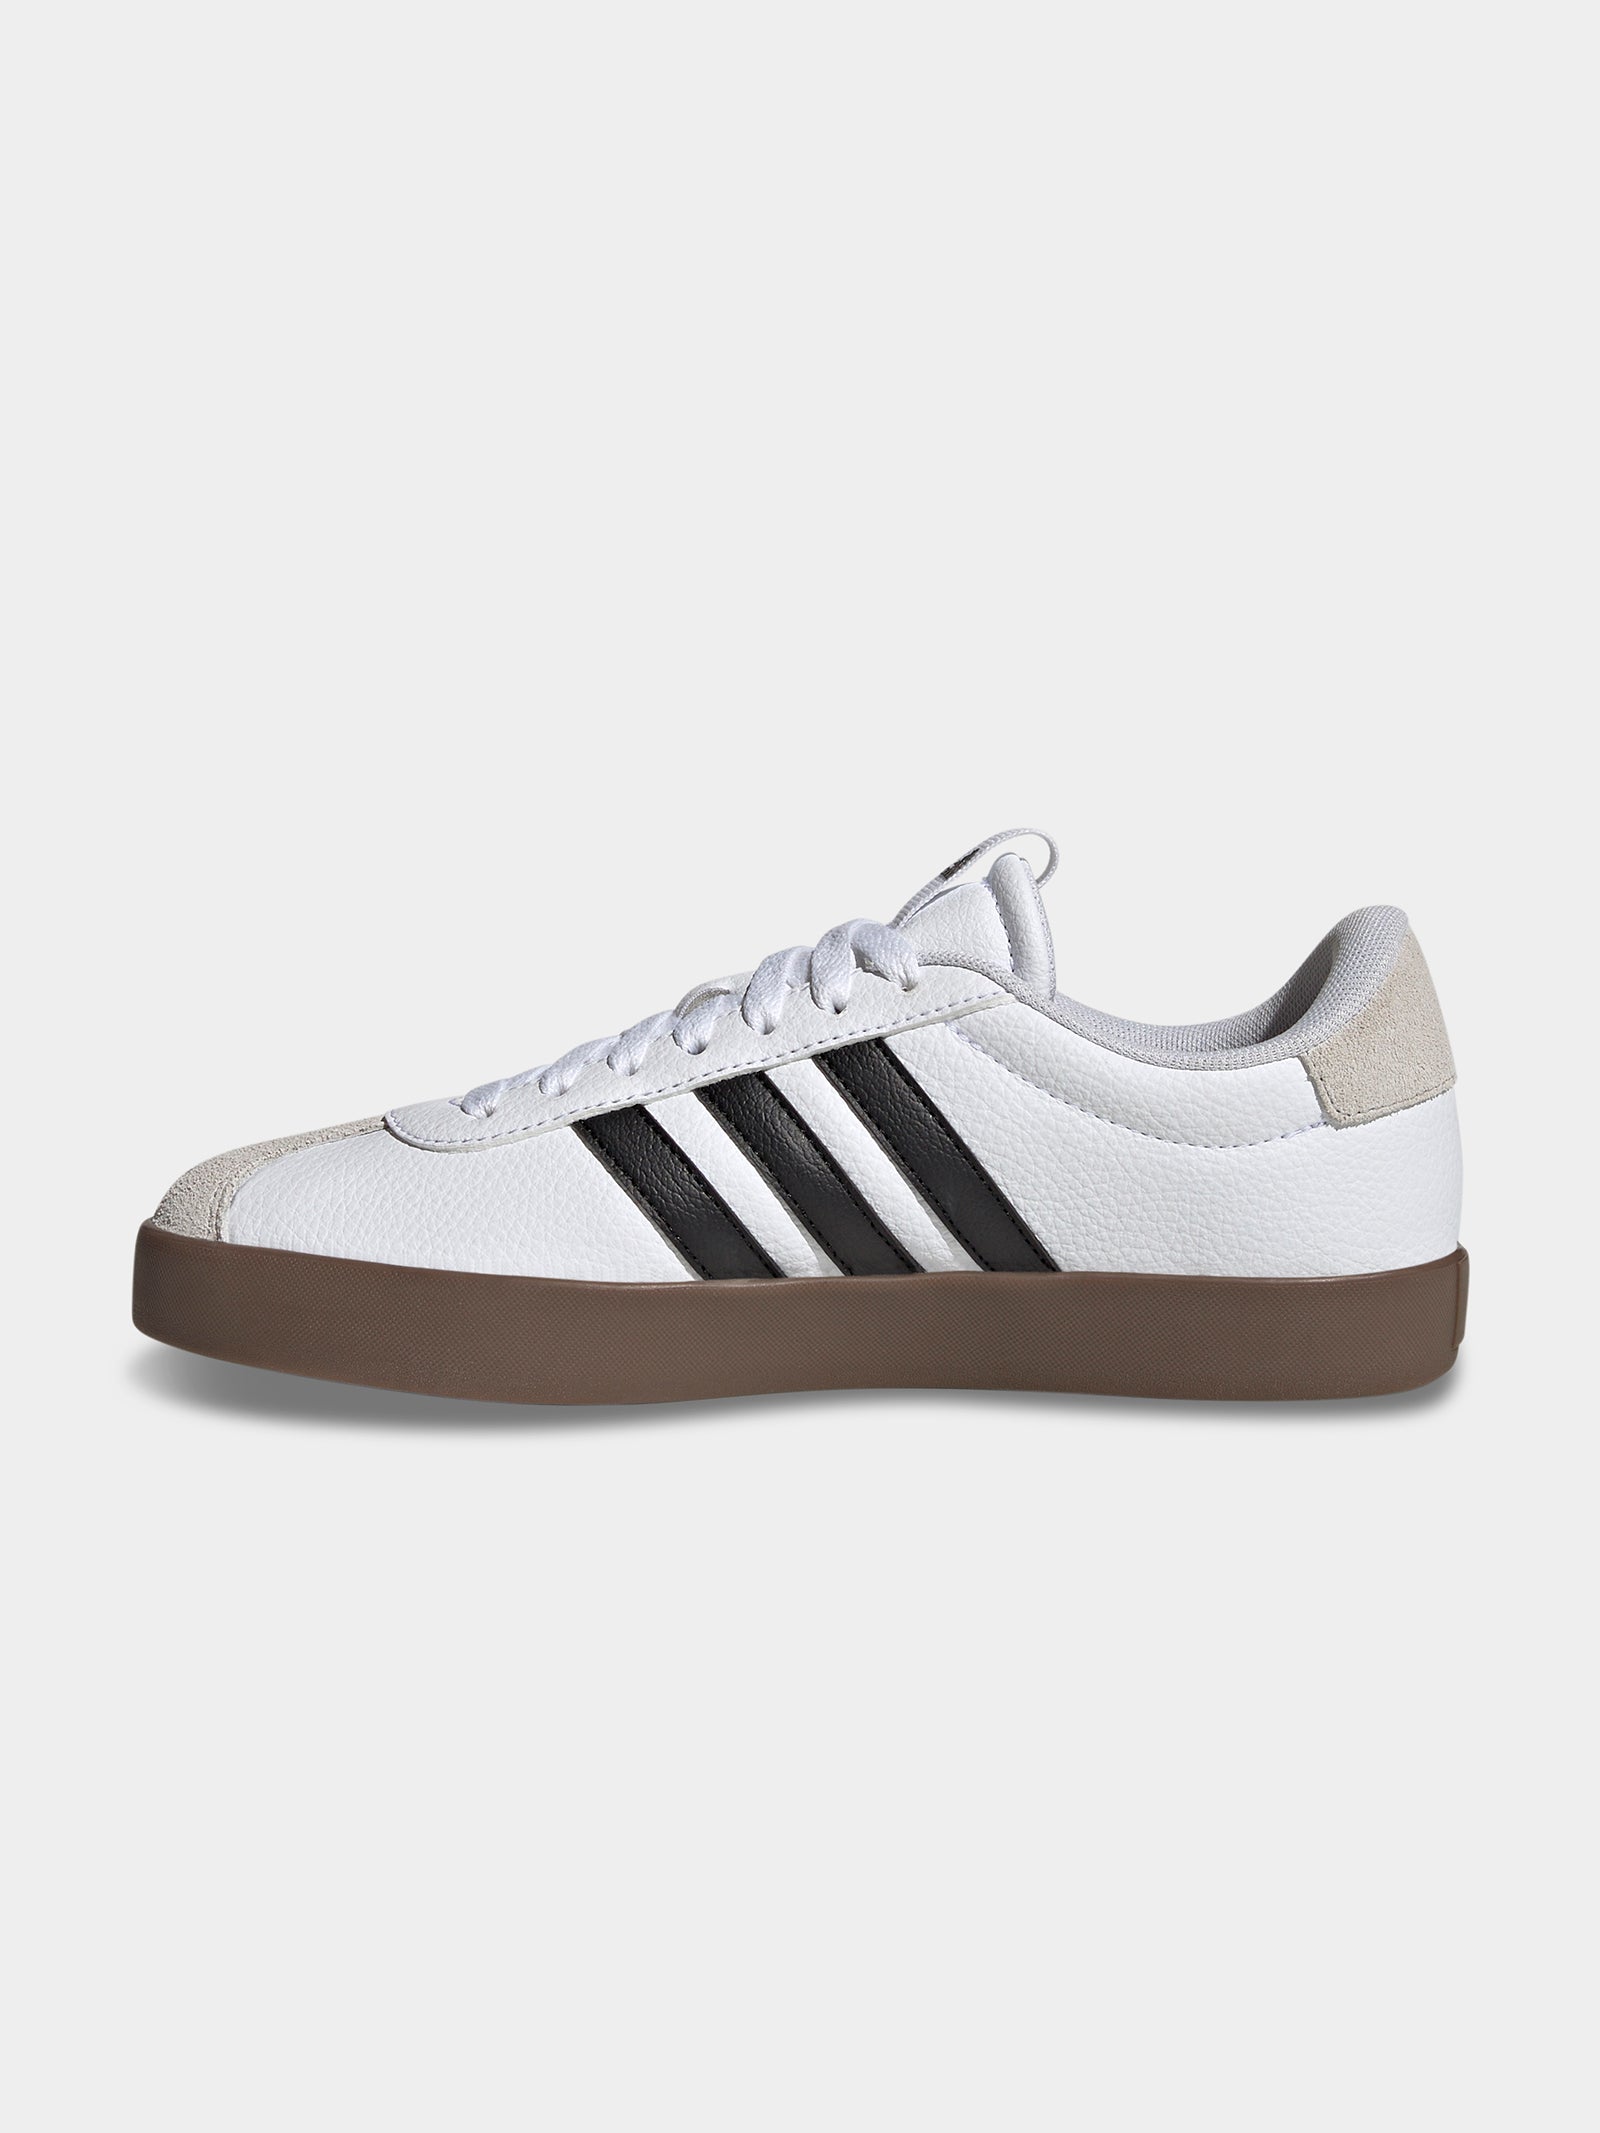 Womens VL Court 3.0 Sneakers in Cloud White, Core Black & Grey